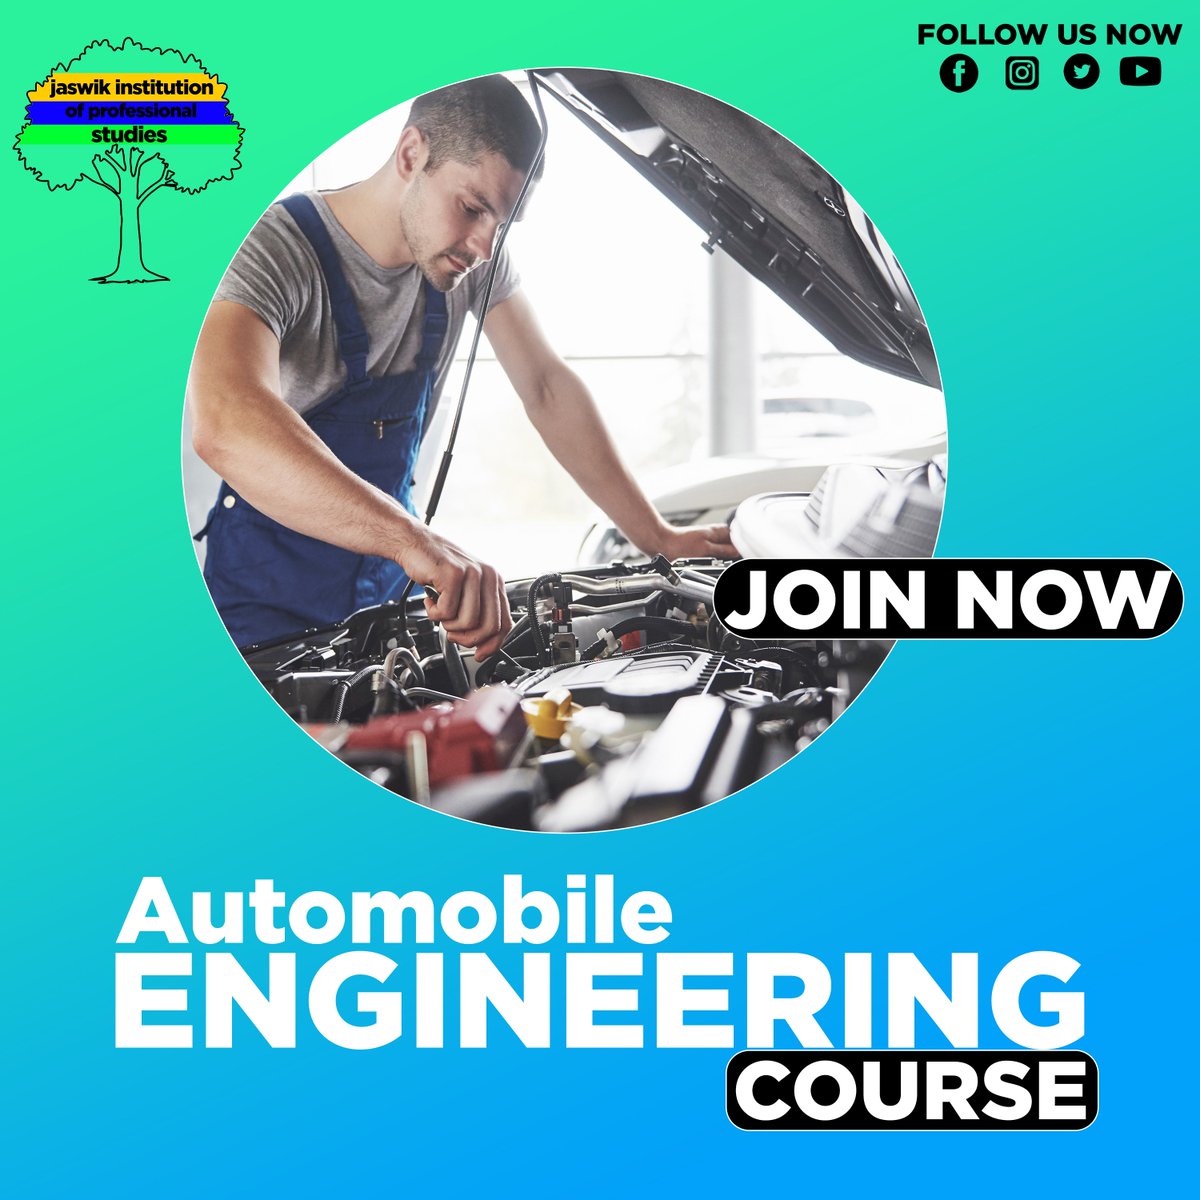 '🚀🏎️ Unleash the Power of Innovation and Design! 🛠️💡 Accelerate Your Dreams in Automobile Engineering! Join the Ride to Excellence! 🚀🌟
!
!
#jaswikinstititionofprofessionalstudies #study #studies #MCommerceRevolution #CommerceMadeEasy #ElectricalEngineering